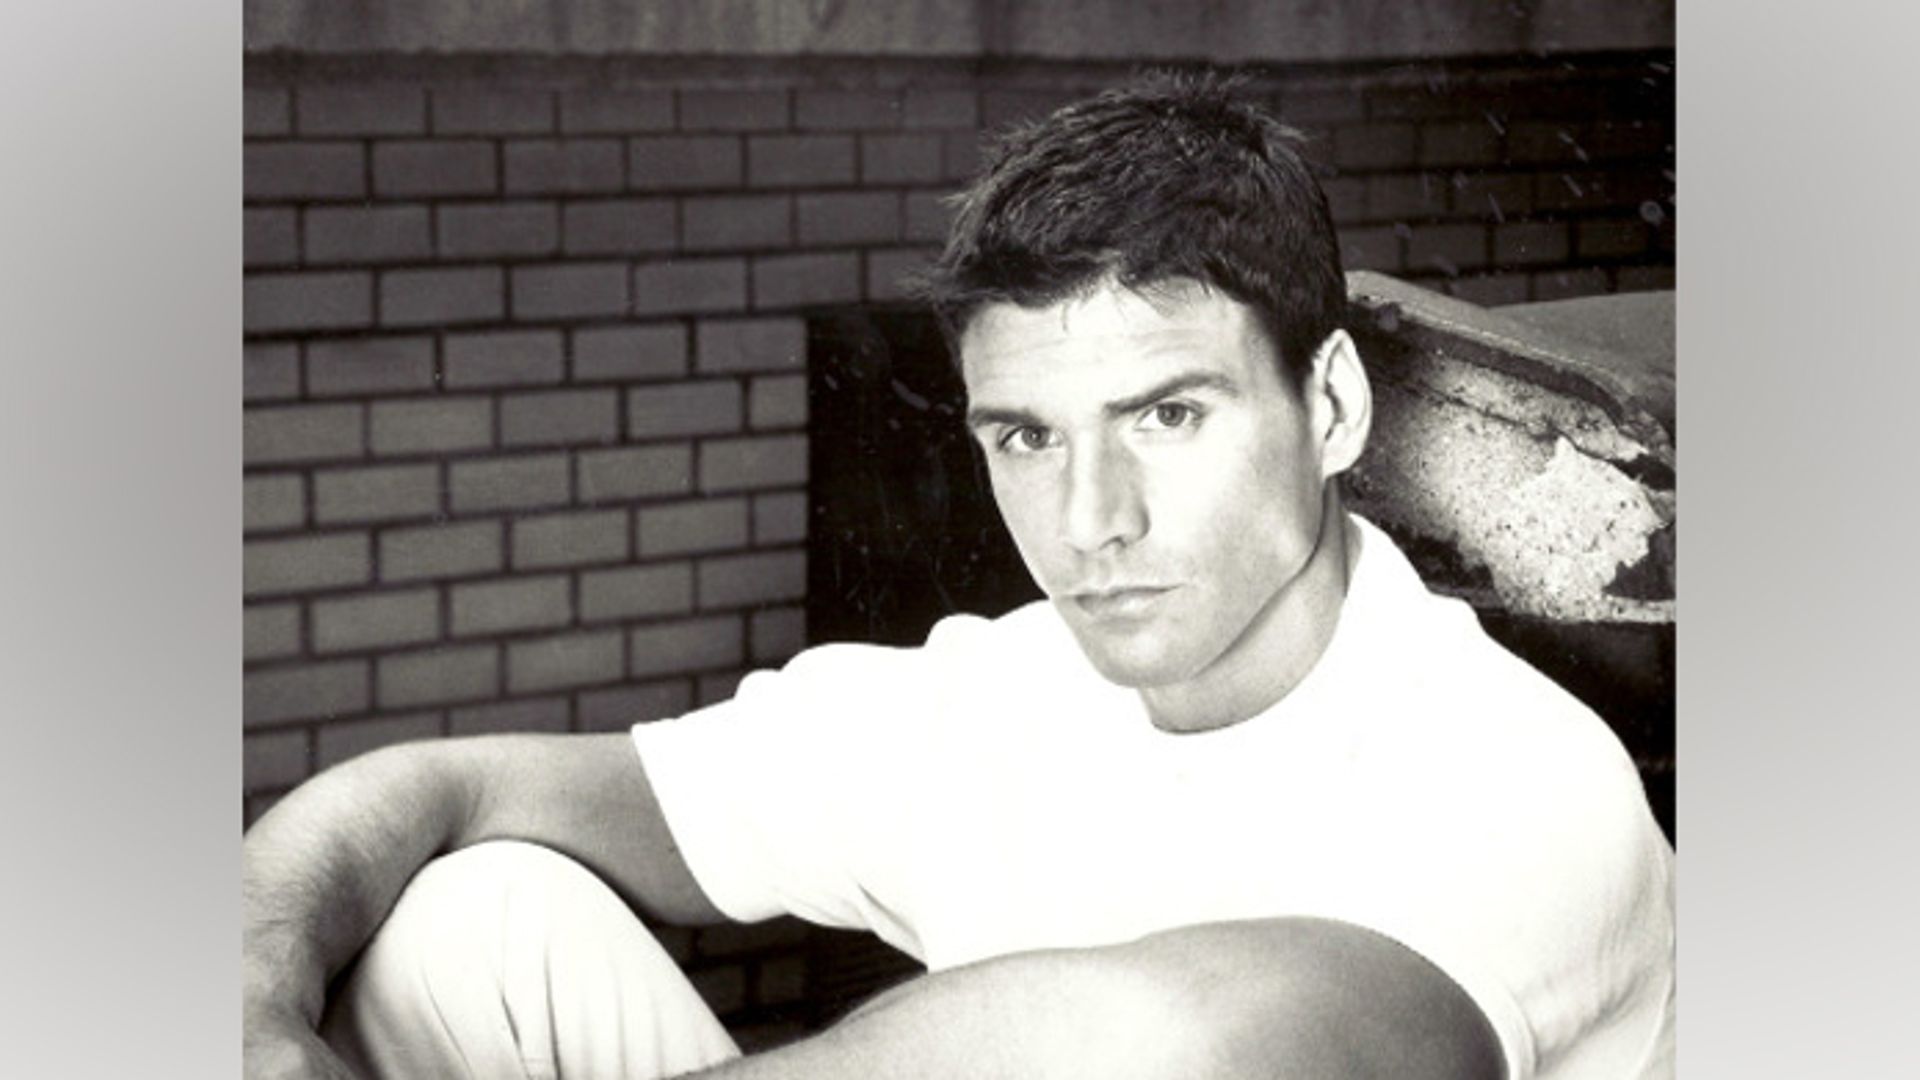 Frank Grillo in his youth